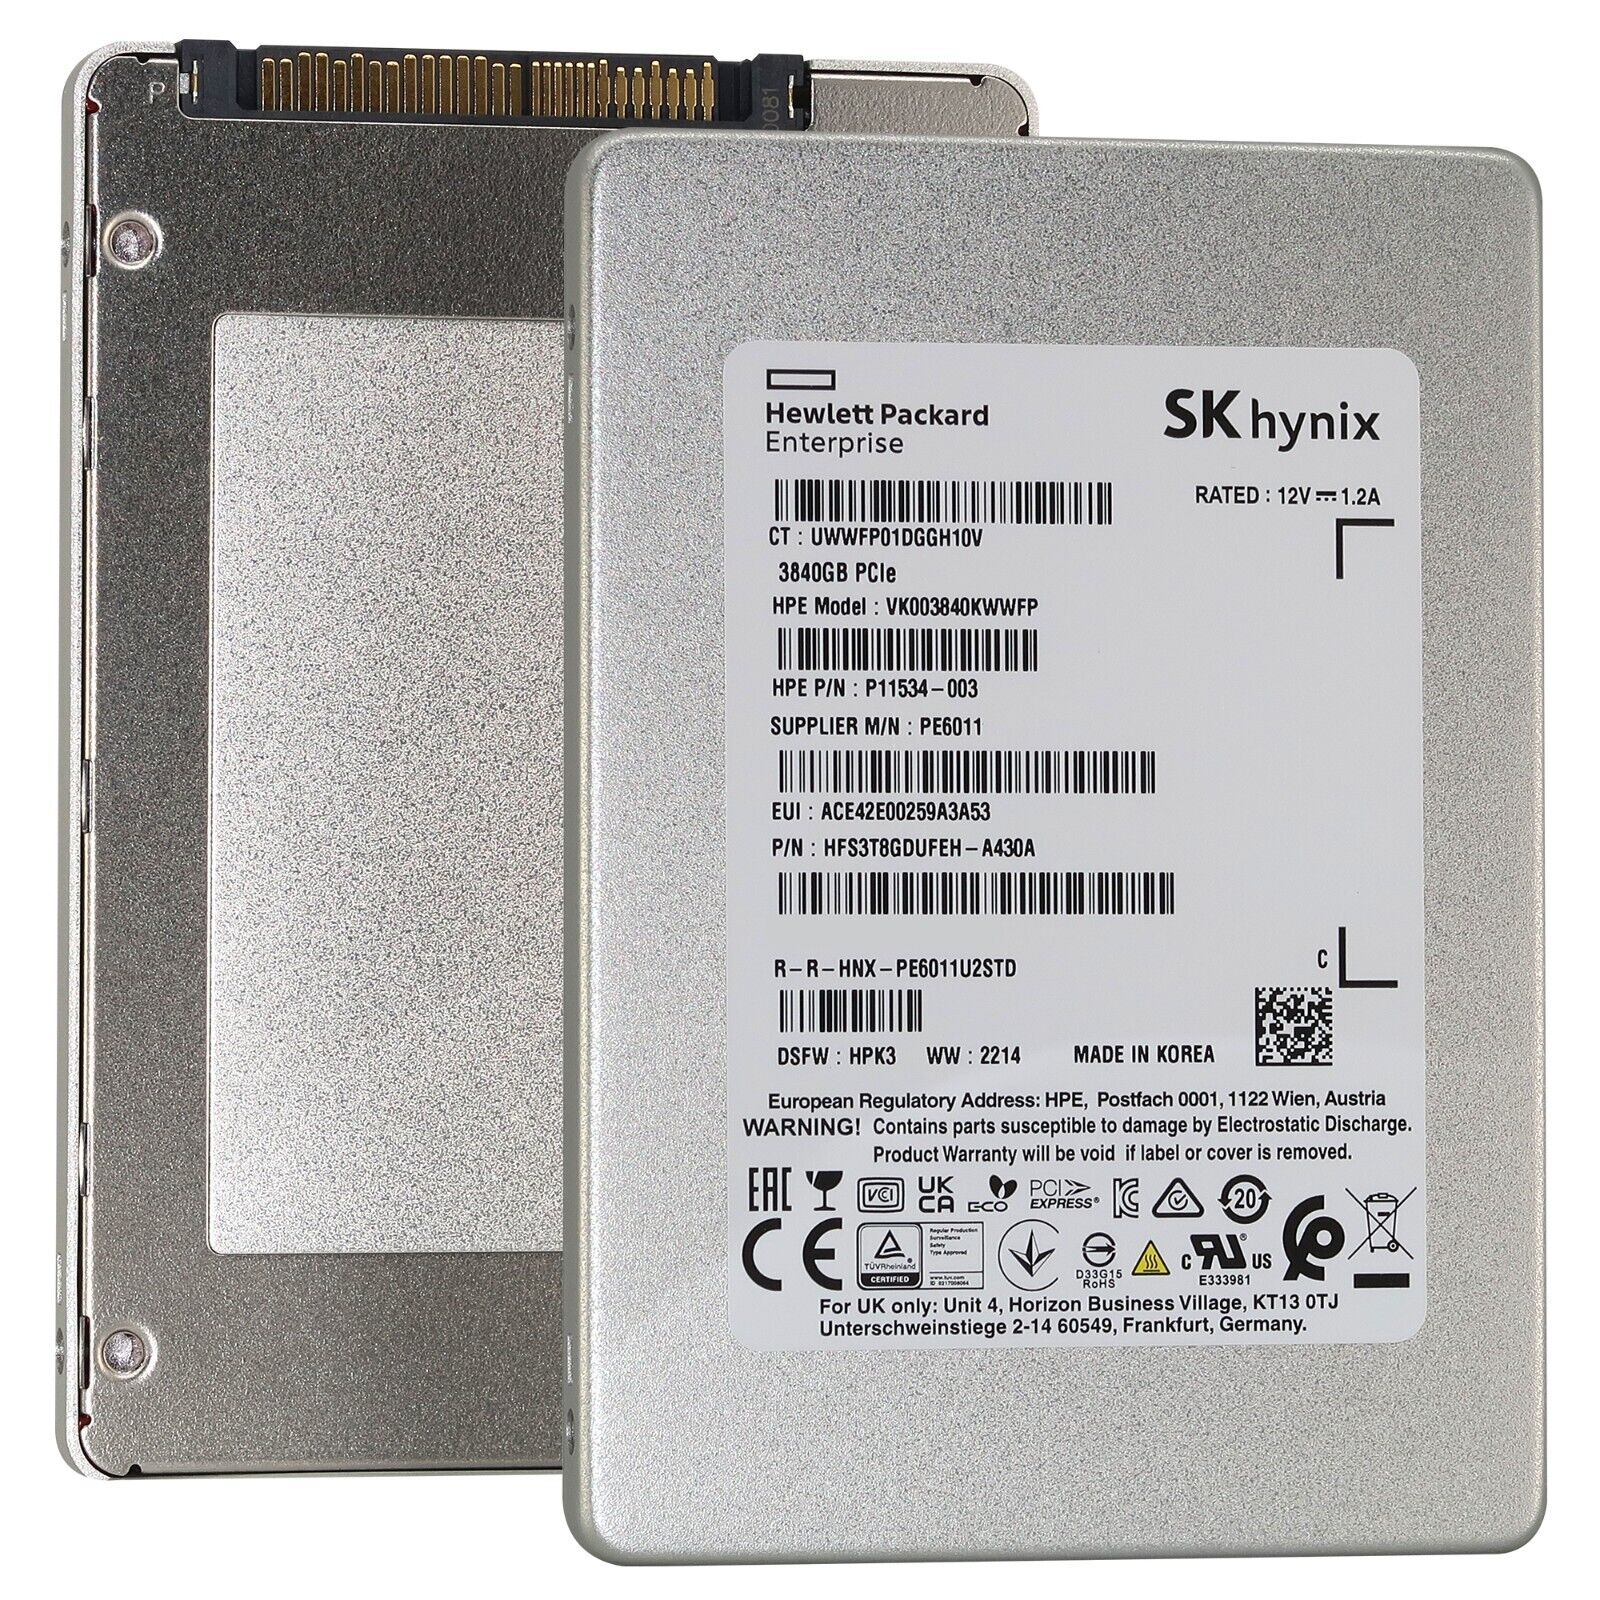 SK Hynix PE6011 HFS3T8GDUFEH 3.84TB PCIe Gen 3.0 x4 4GB/s 3D TLC U.2 NVMe 2.5in Solid State Drive